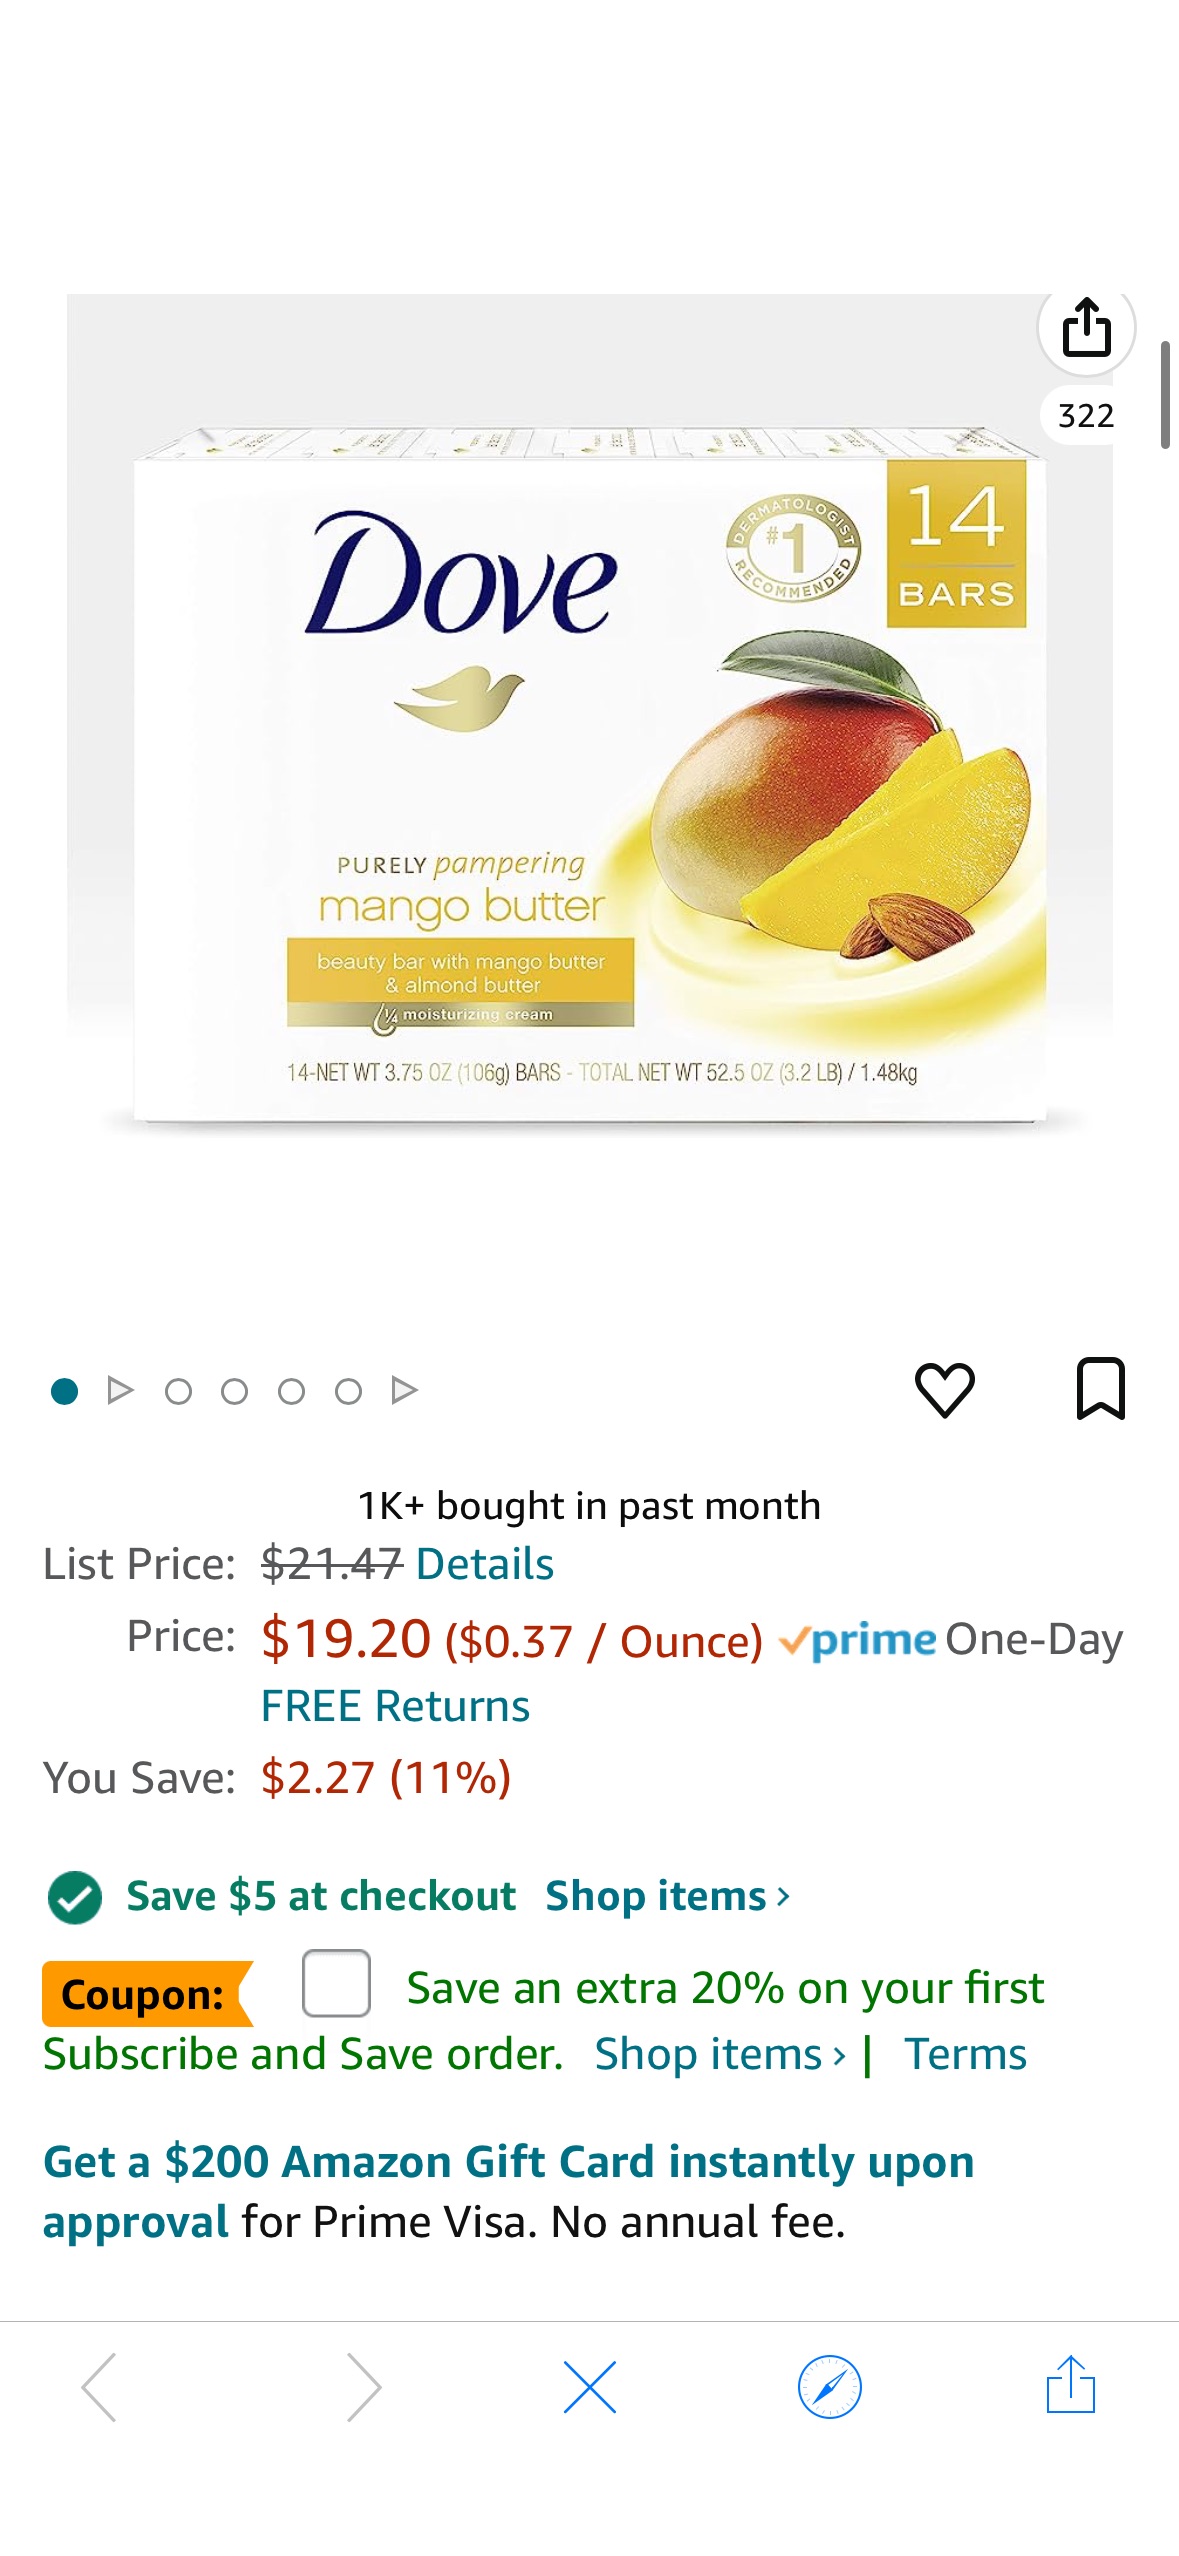 Amazon.com : Dove Beauty Bar To Moisturize Dry Skin With Mango Butter More Moisturizing Than Bar Soap, 3.75 Ounce (Pack of 14) : Beauty & Personal Care